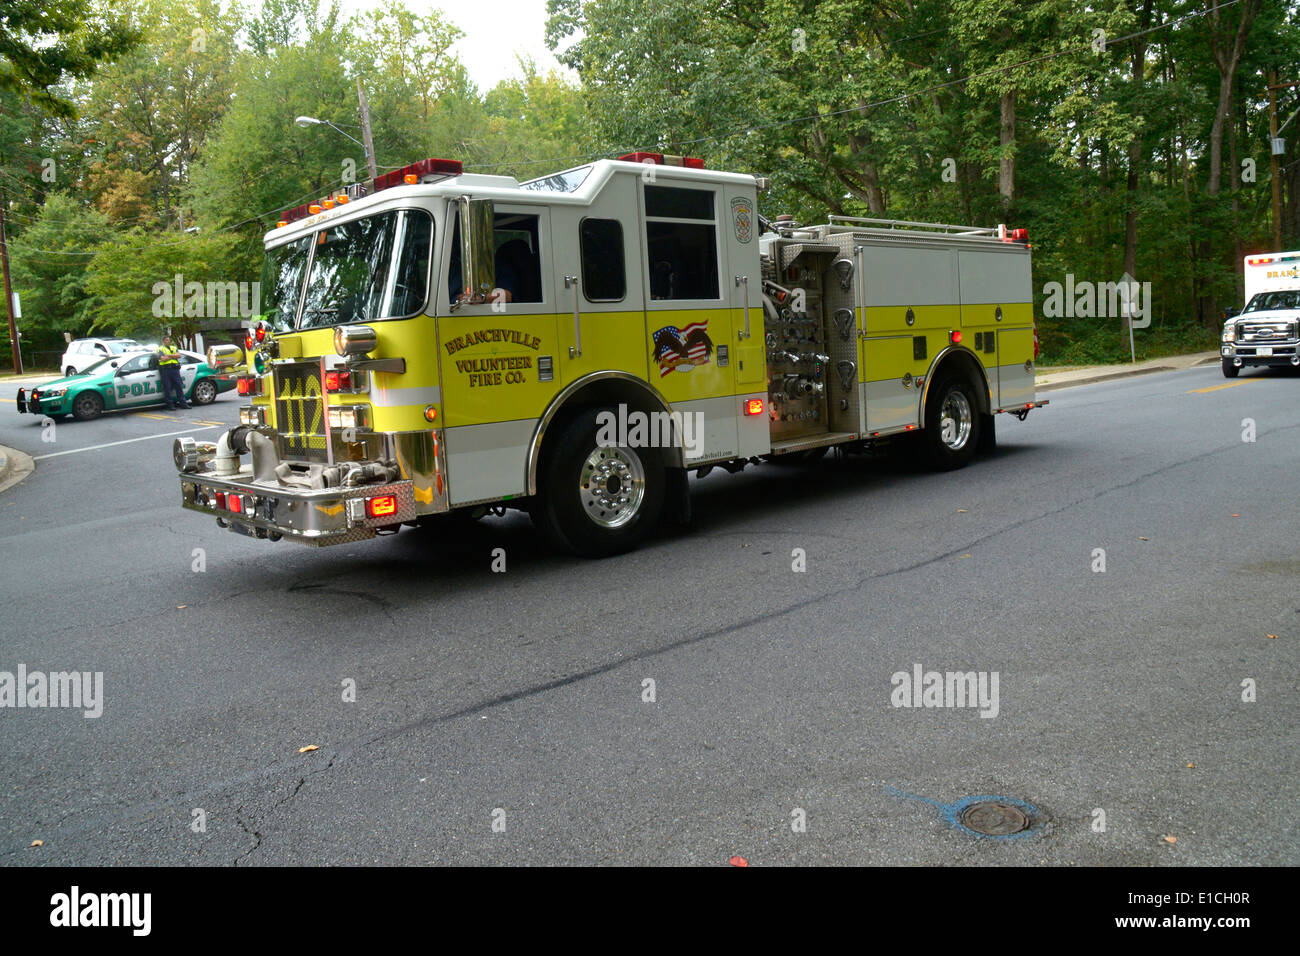 Fire truck on a emergency call Stock Photo